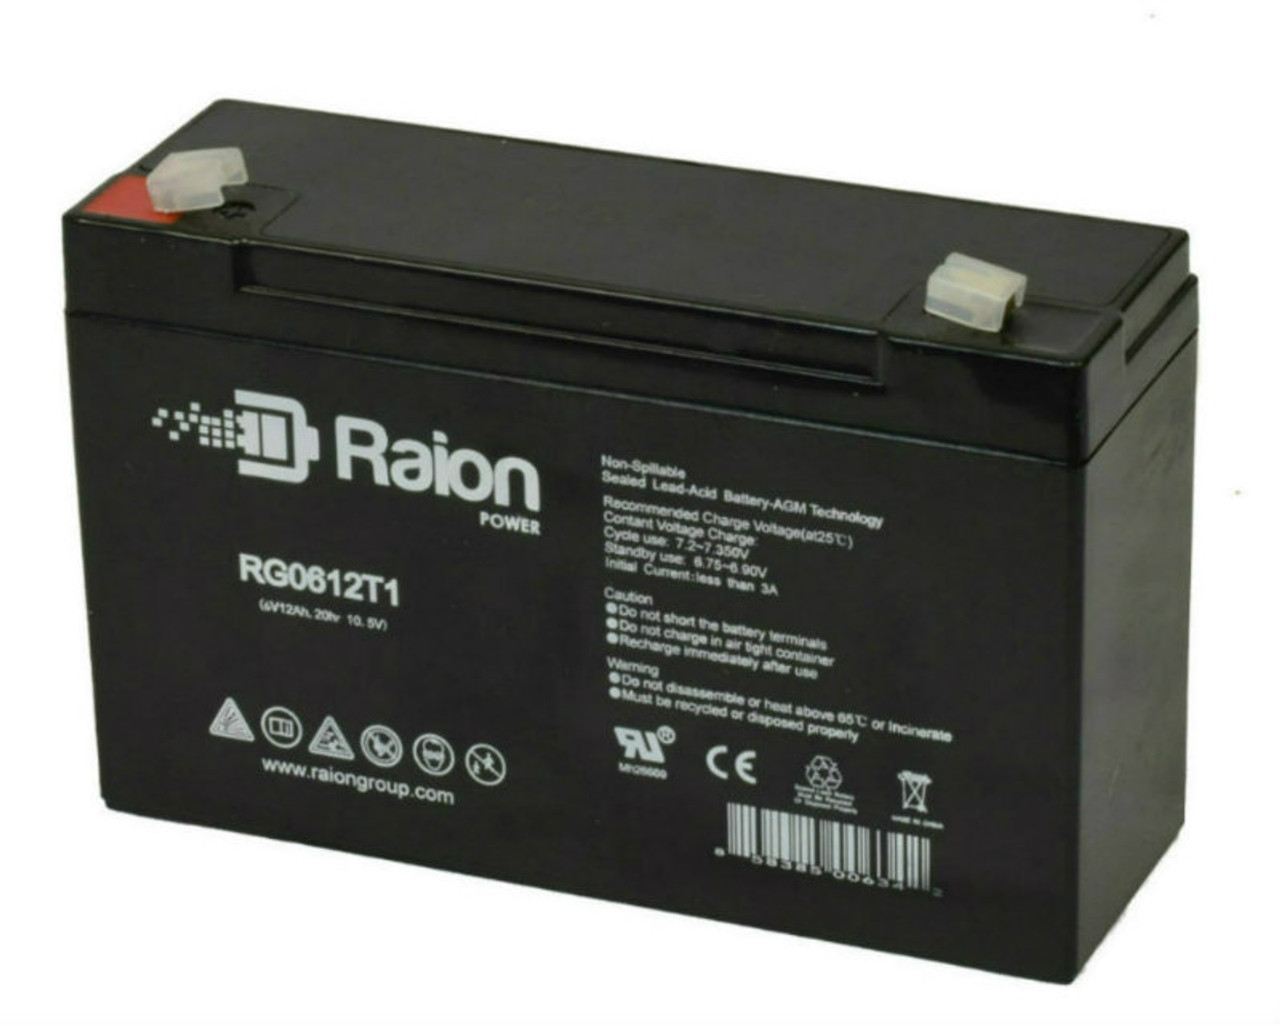 Raion Power RG06120T1 Replacement Battery for Kendall-Mcgaw 7922 VIP Pump Medical Equipment